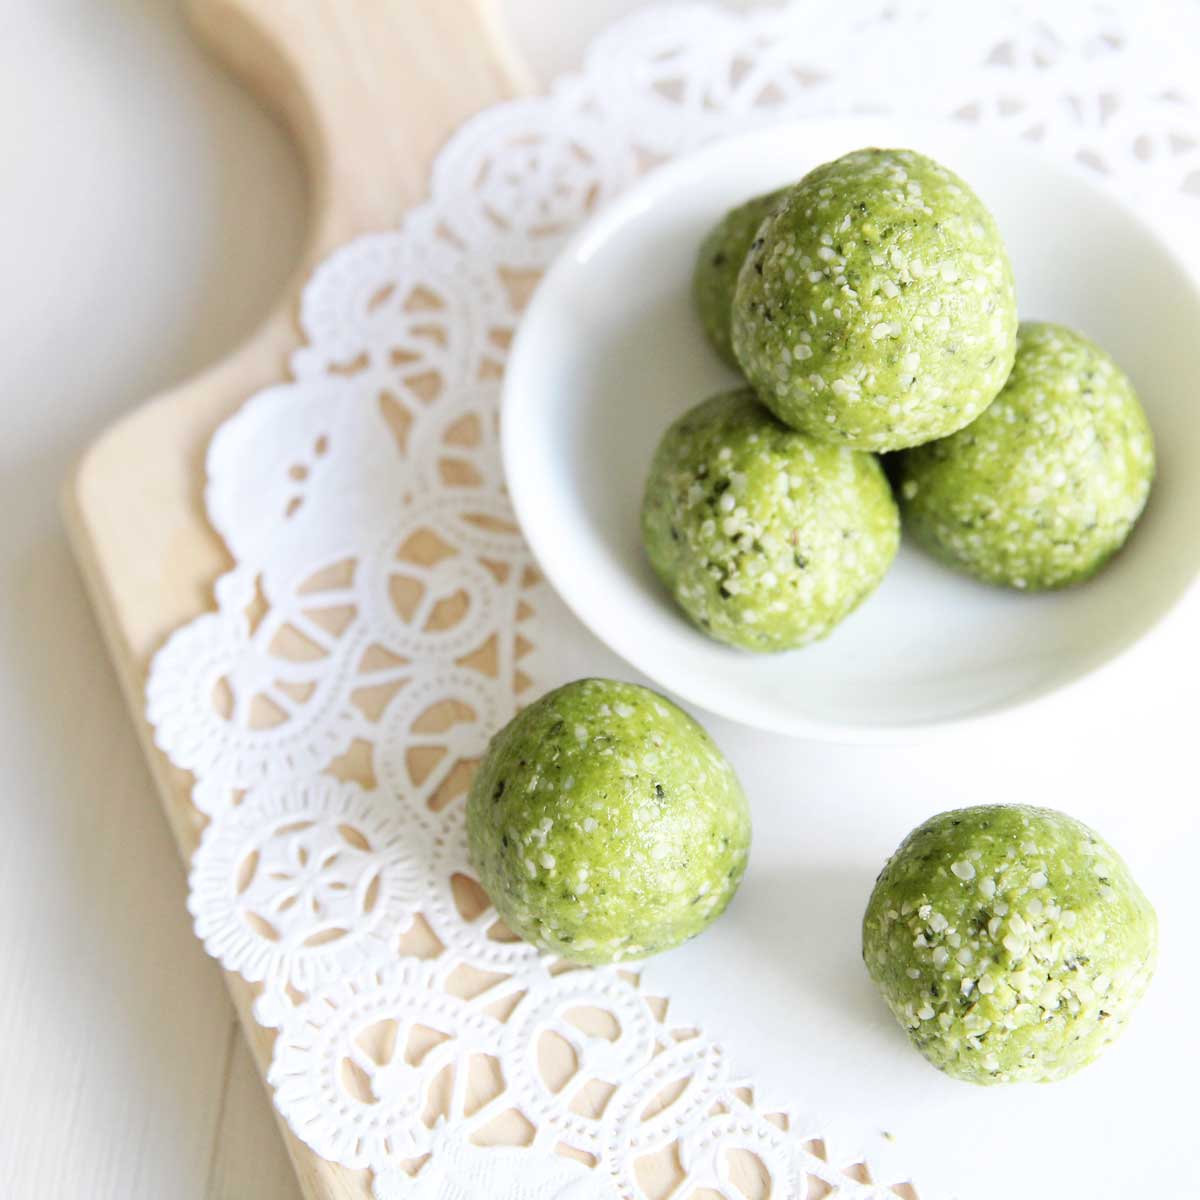 Power Packed Matcha Latte Protein Balls Recipe with Collagen Peptides - Pistachio Nice Cream